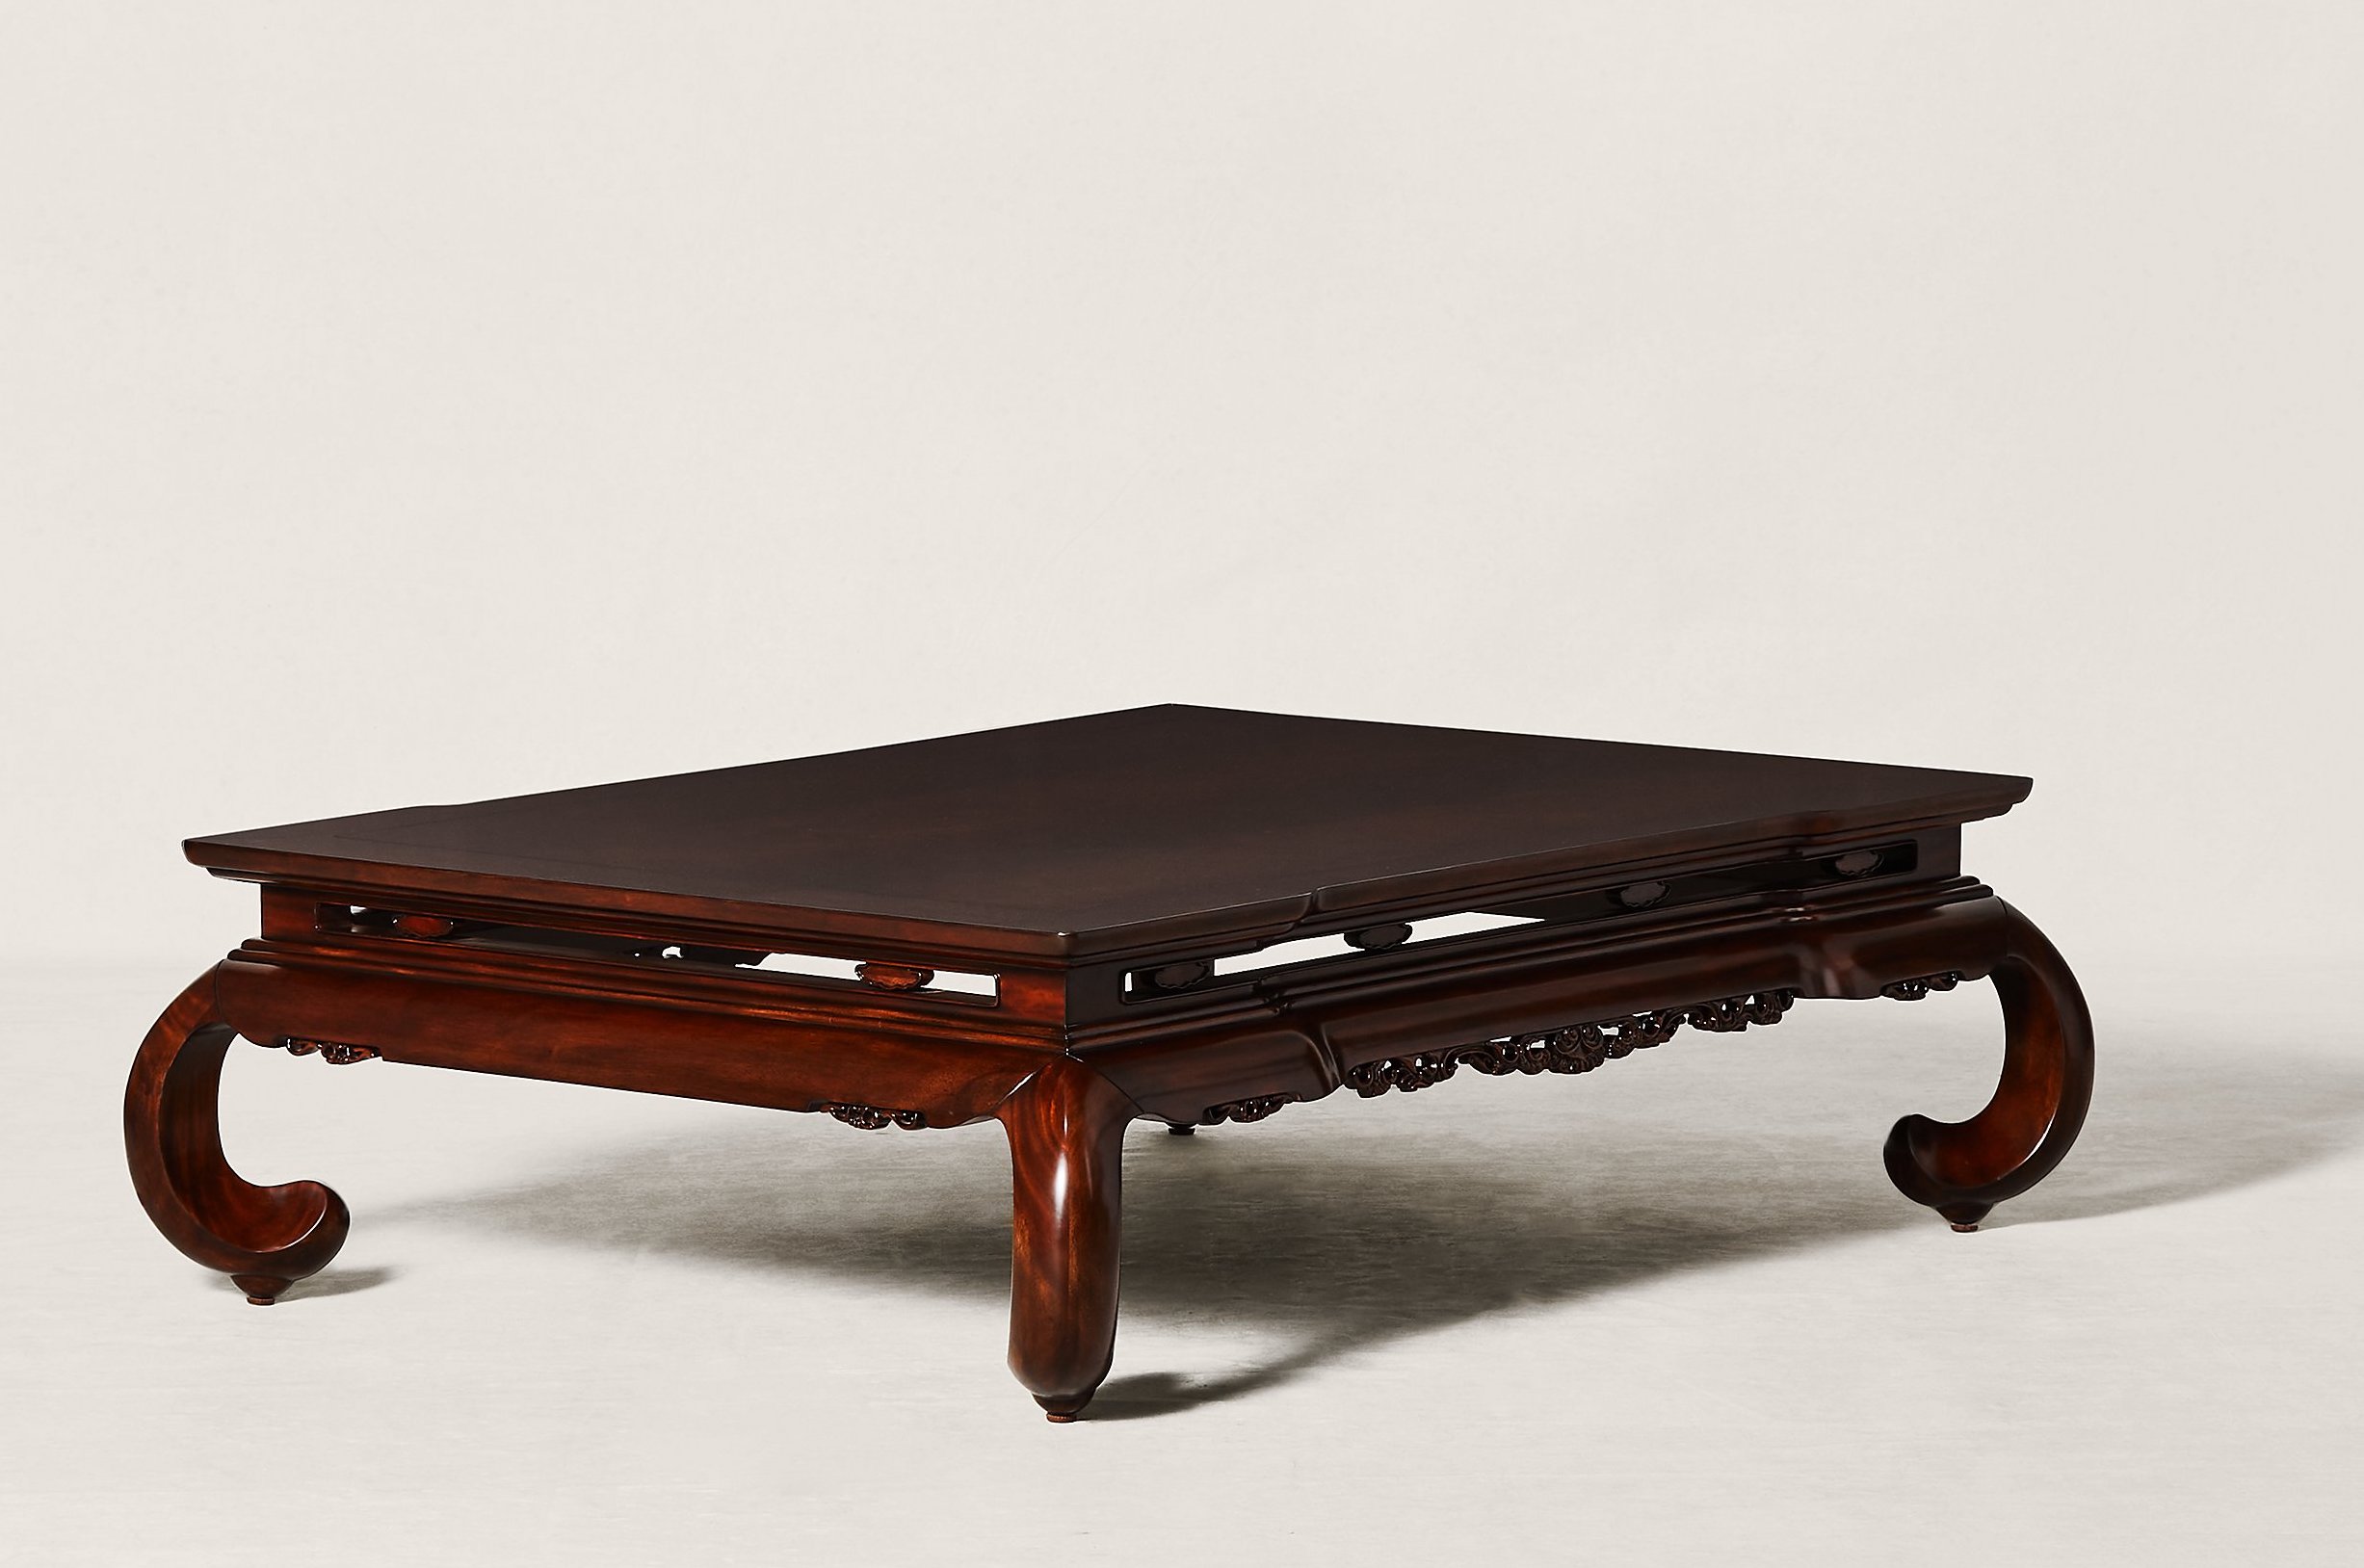 an ornate wooden coffee table by Ralph Lauren